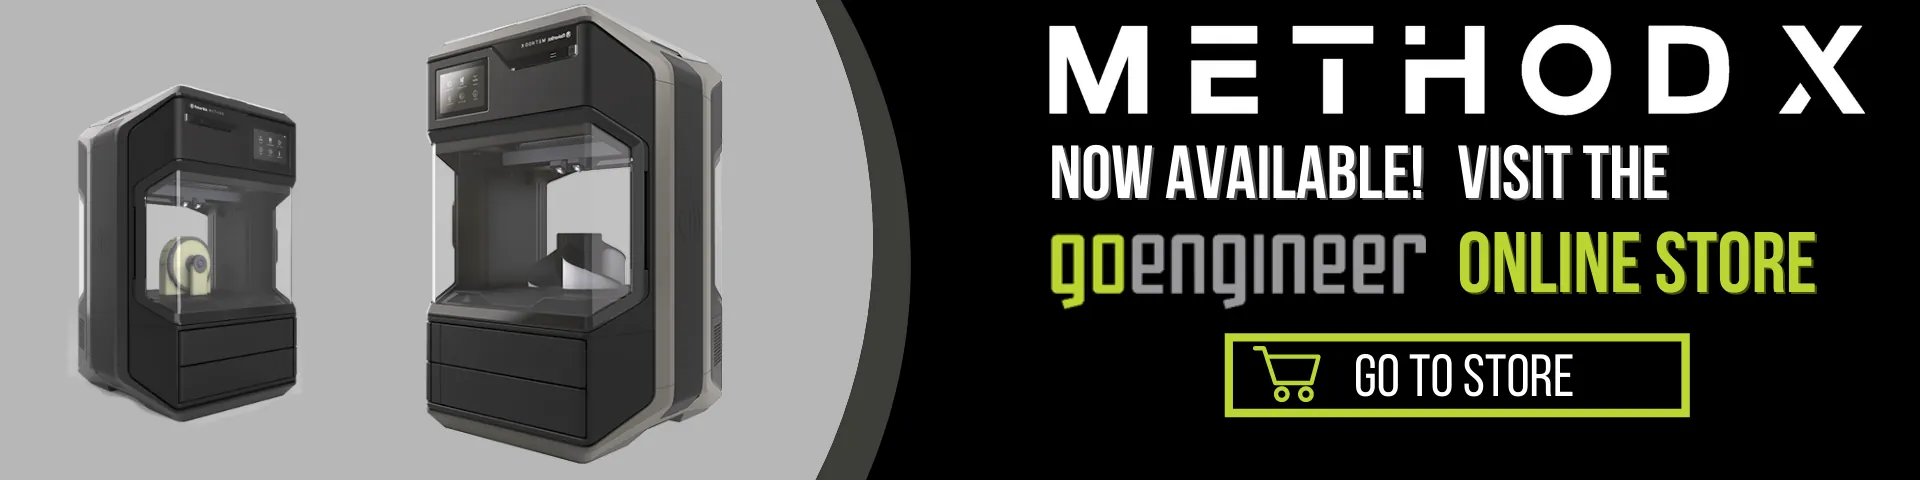 METHOD X Now Available at GoEngineer Online Store